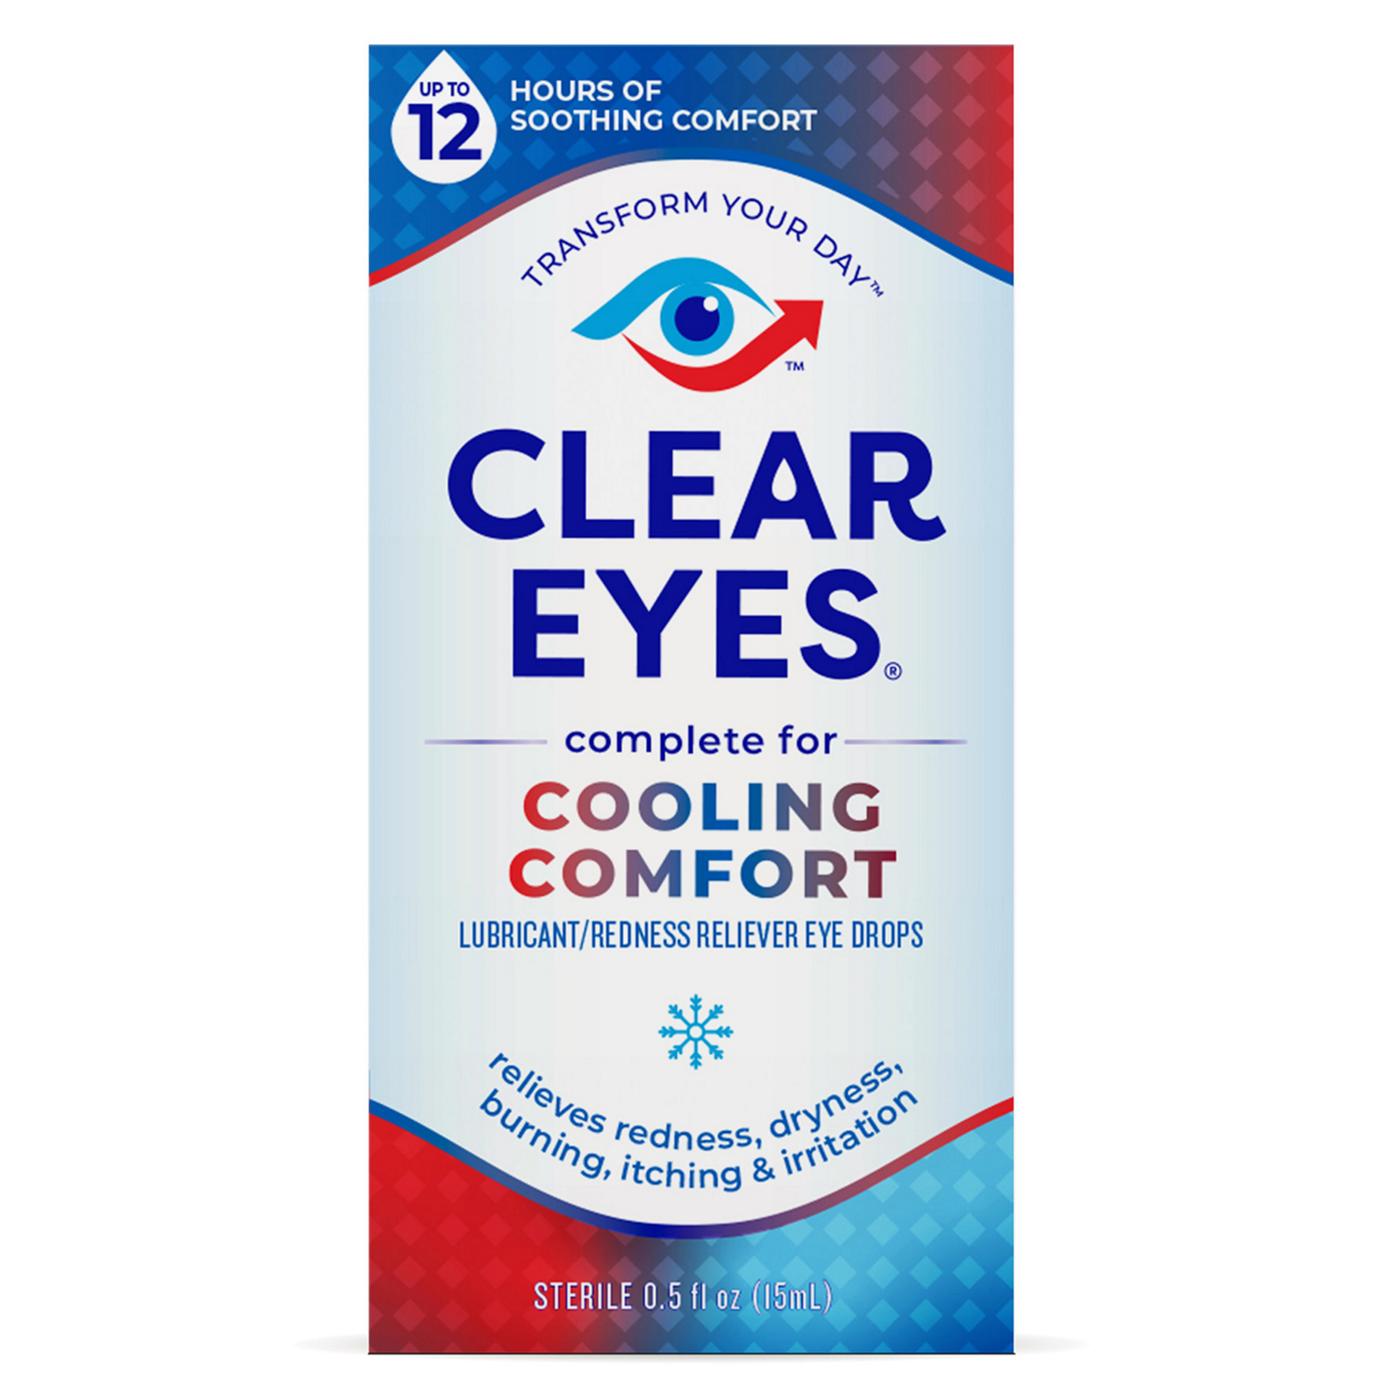 Clear Eyes Cooling Comfort Eye Drops; image 1 of 5